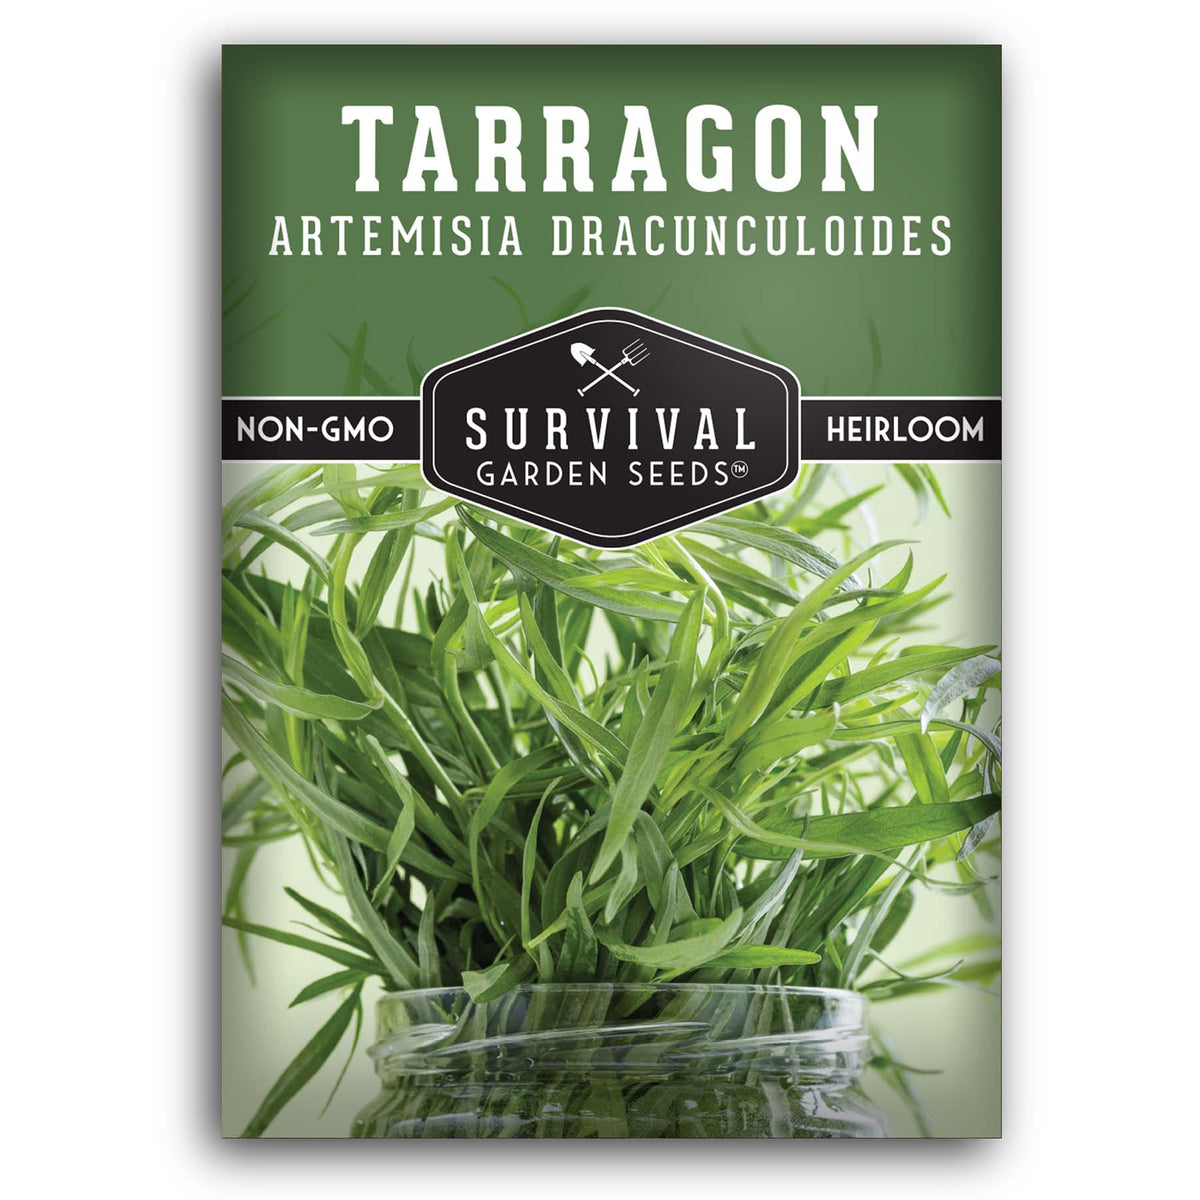 Russian Tarragon seeds for planting